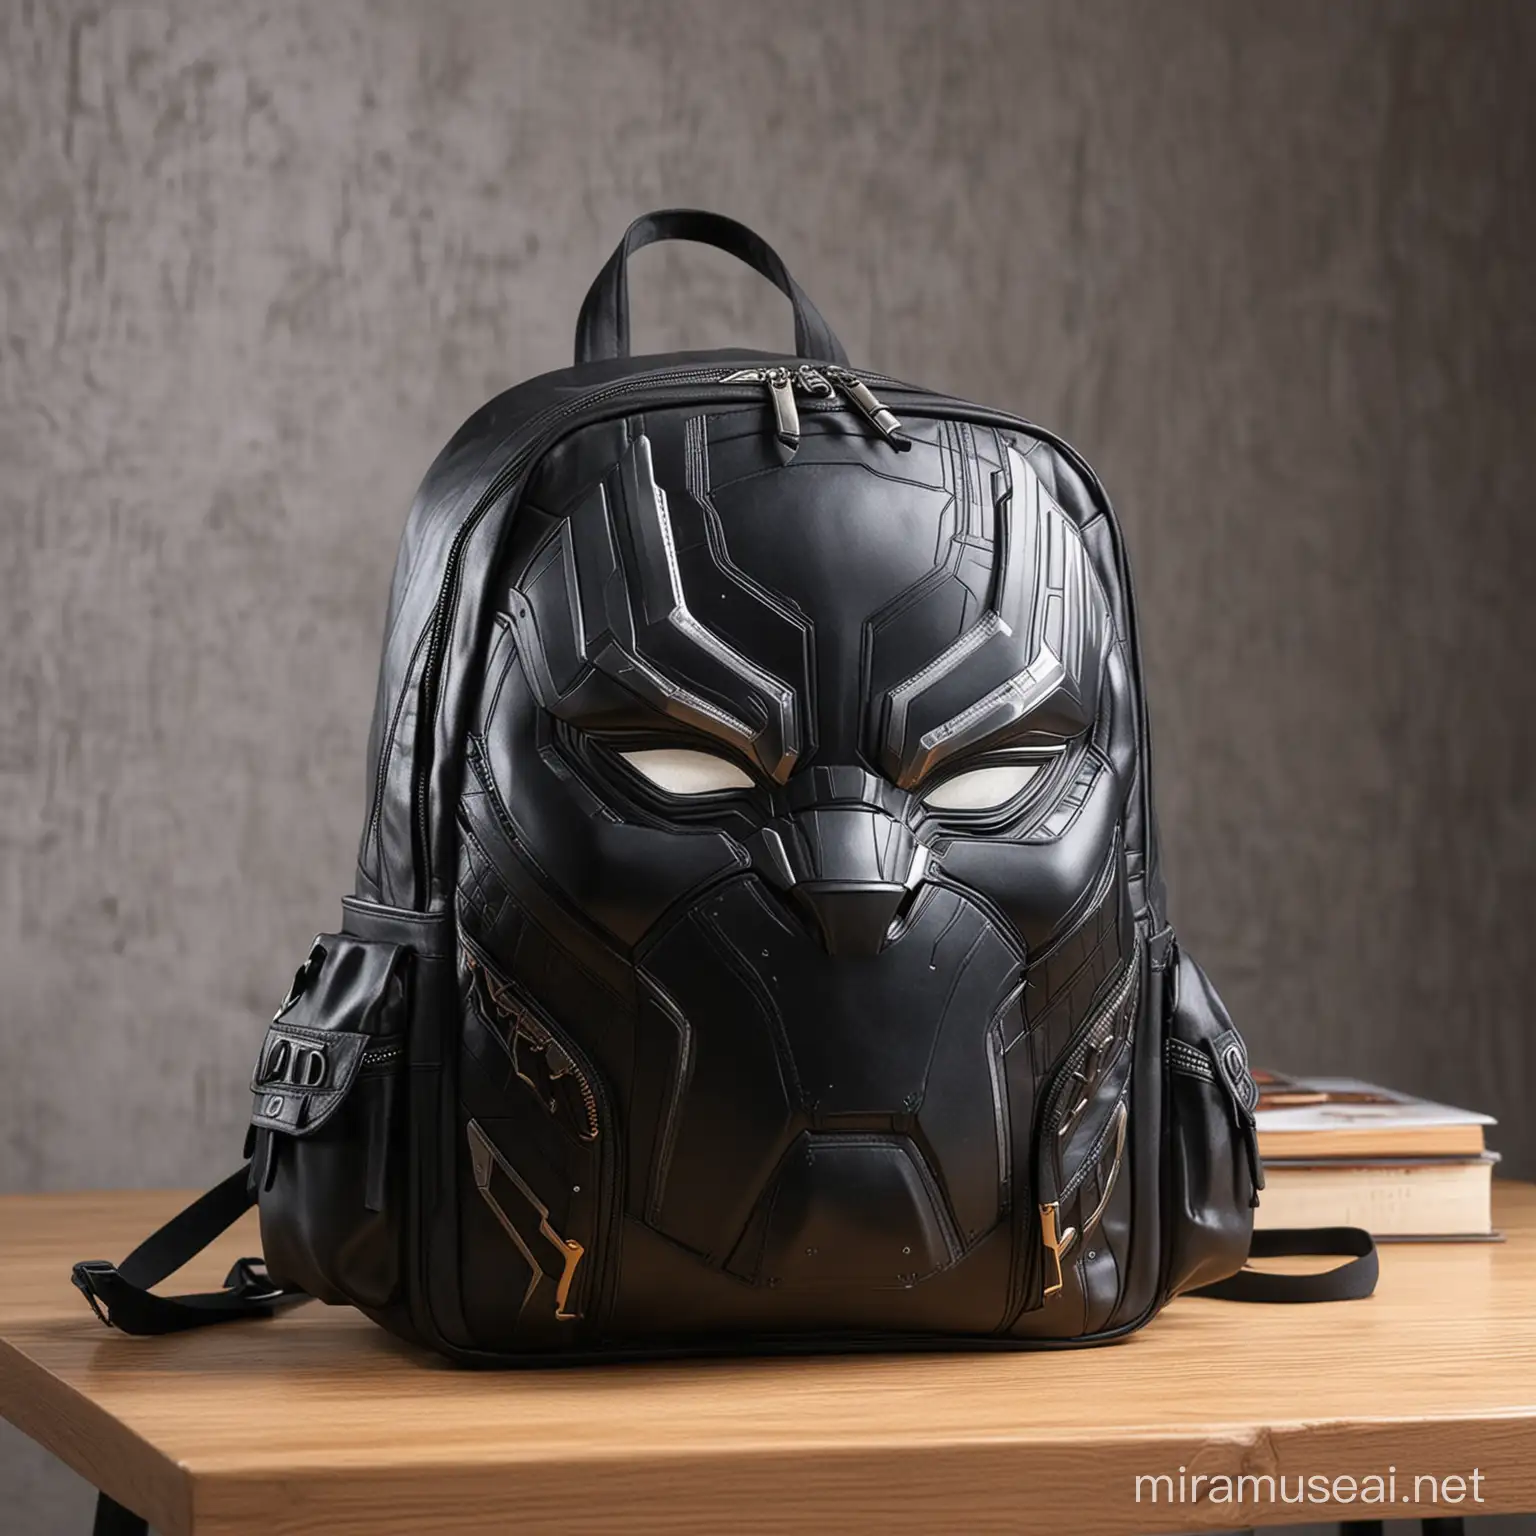 Black Panther Style Backpack on The Table